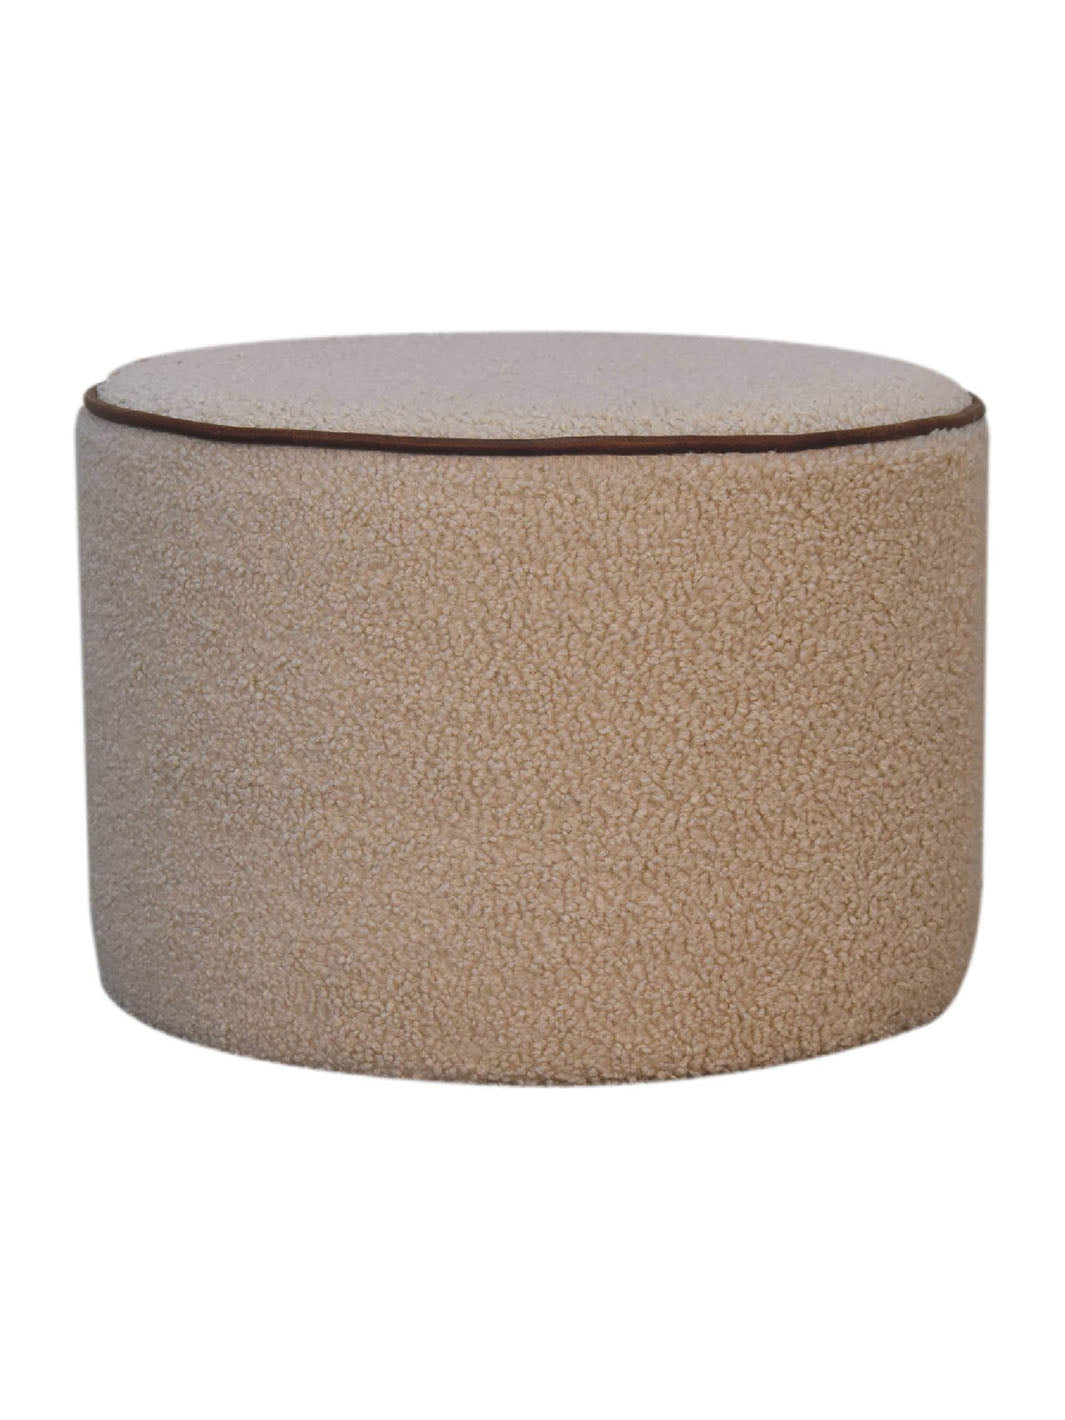 Boucle Round Footstool with Bufallo Leather Piping Artisan Furniture  IN3503-7